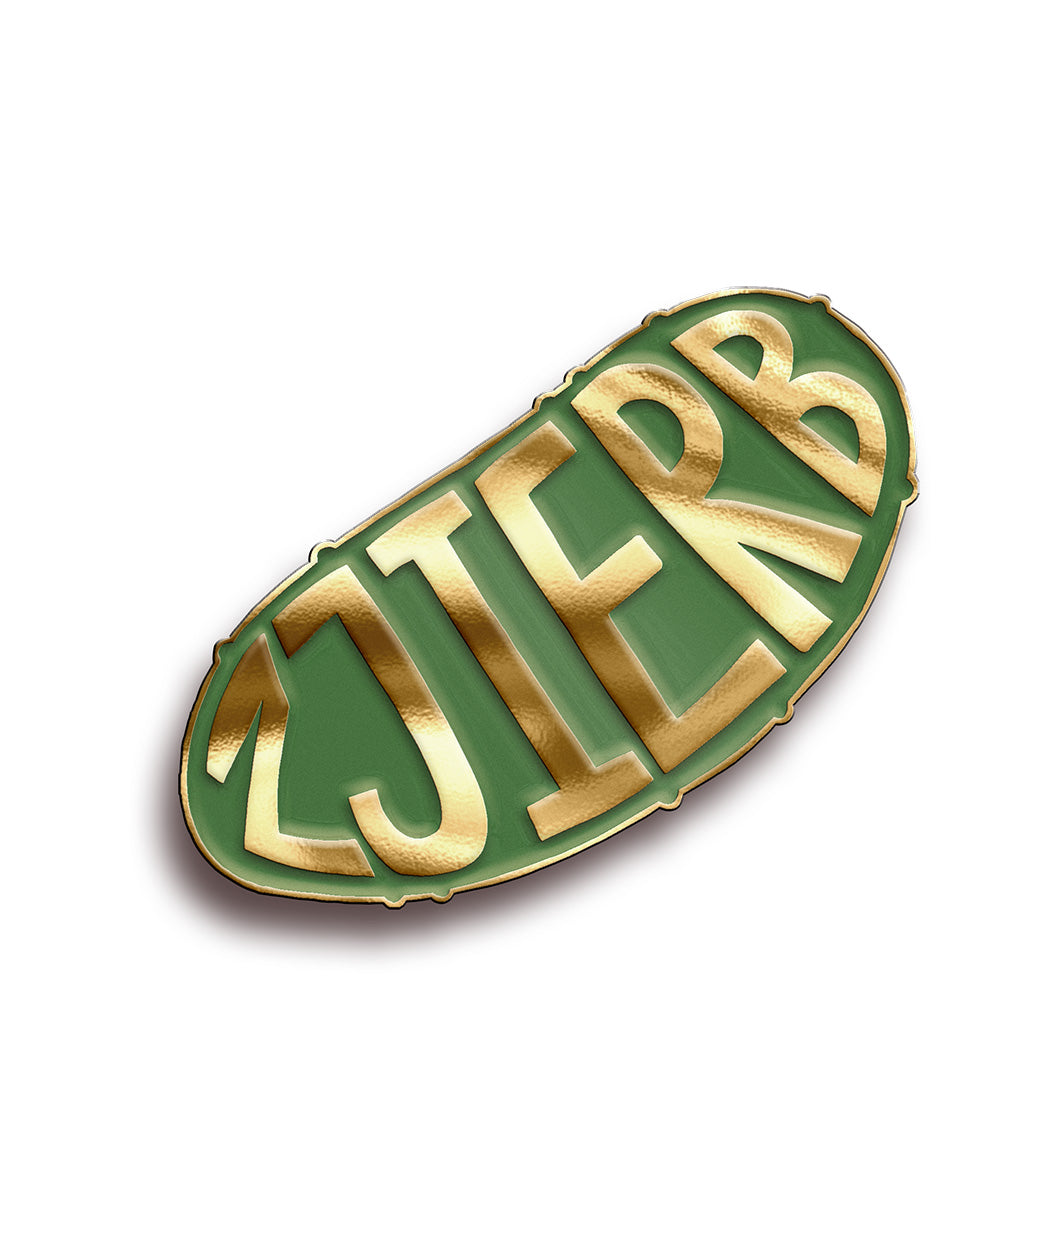 A bean shaped pin with a green background and gold letters 